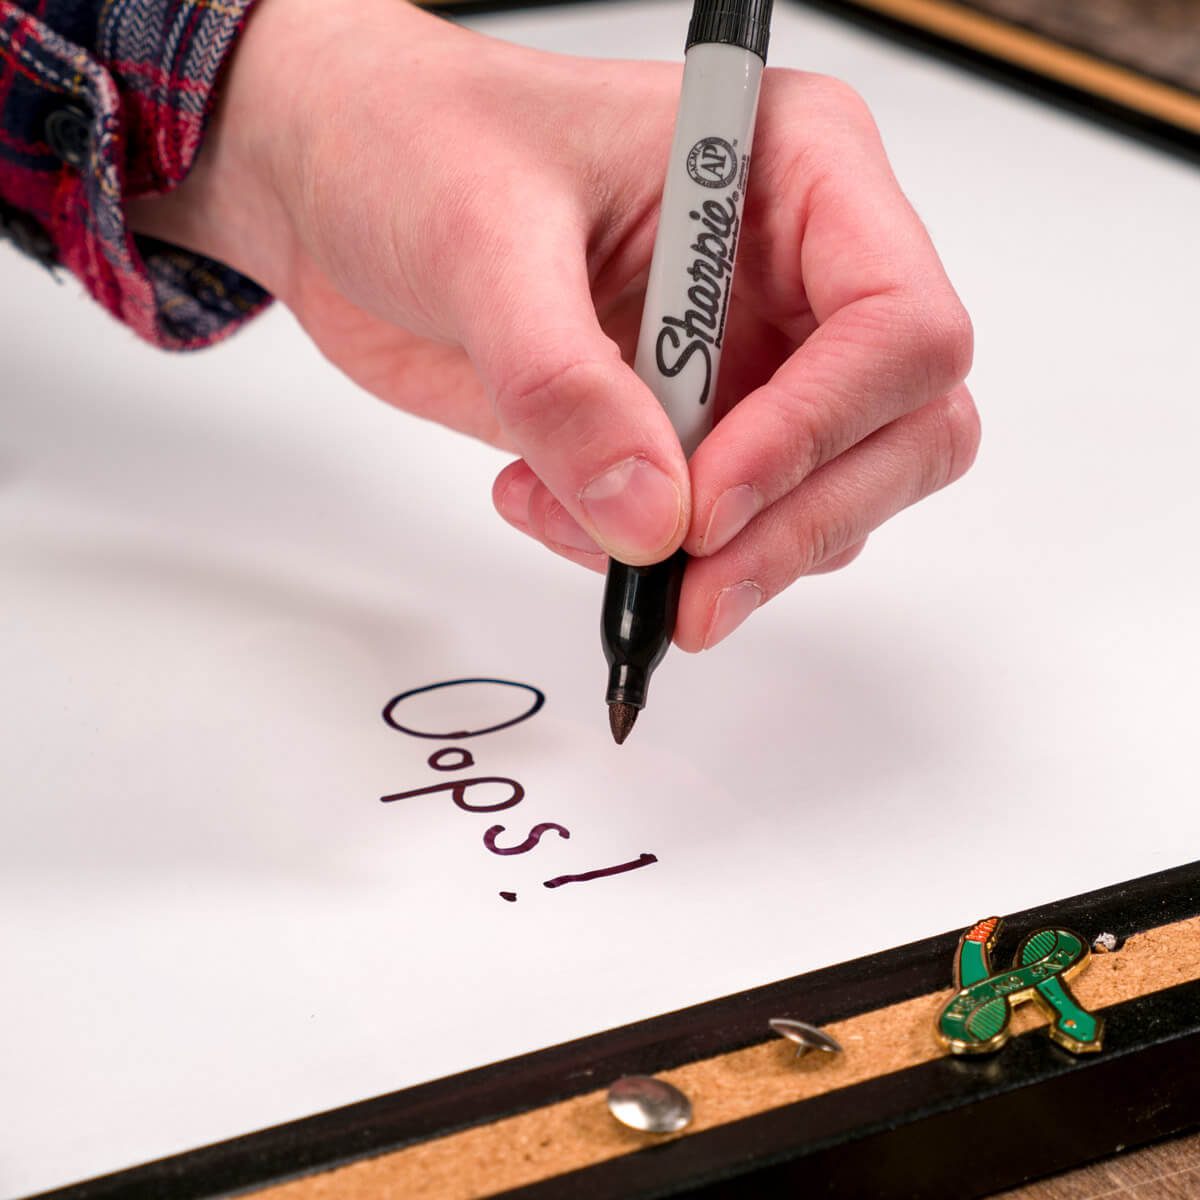 How To Erase Permanent Marker On A Dry Erase Board Family Handyman